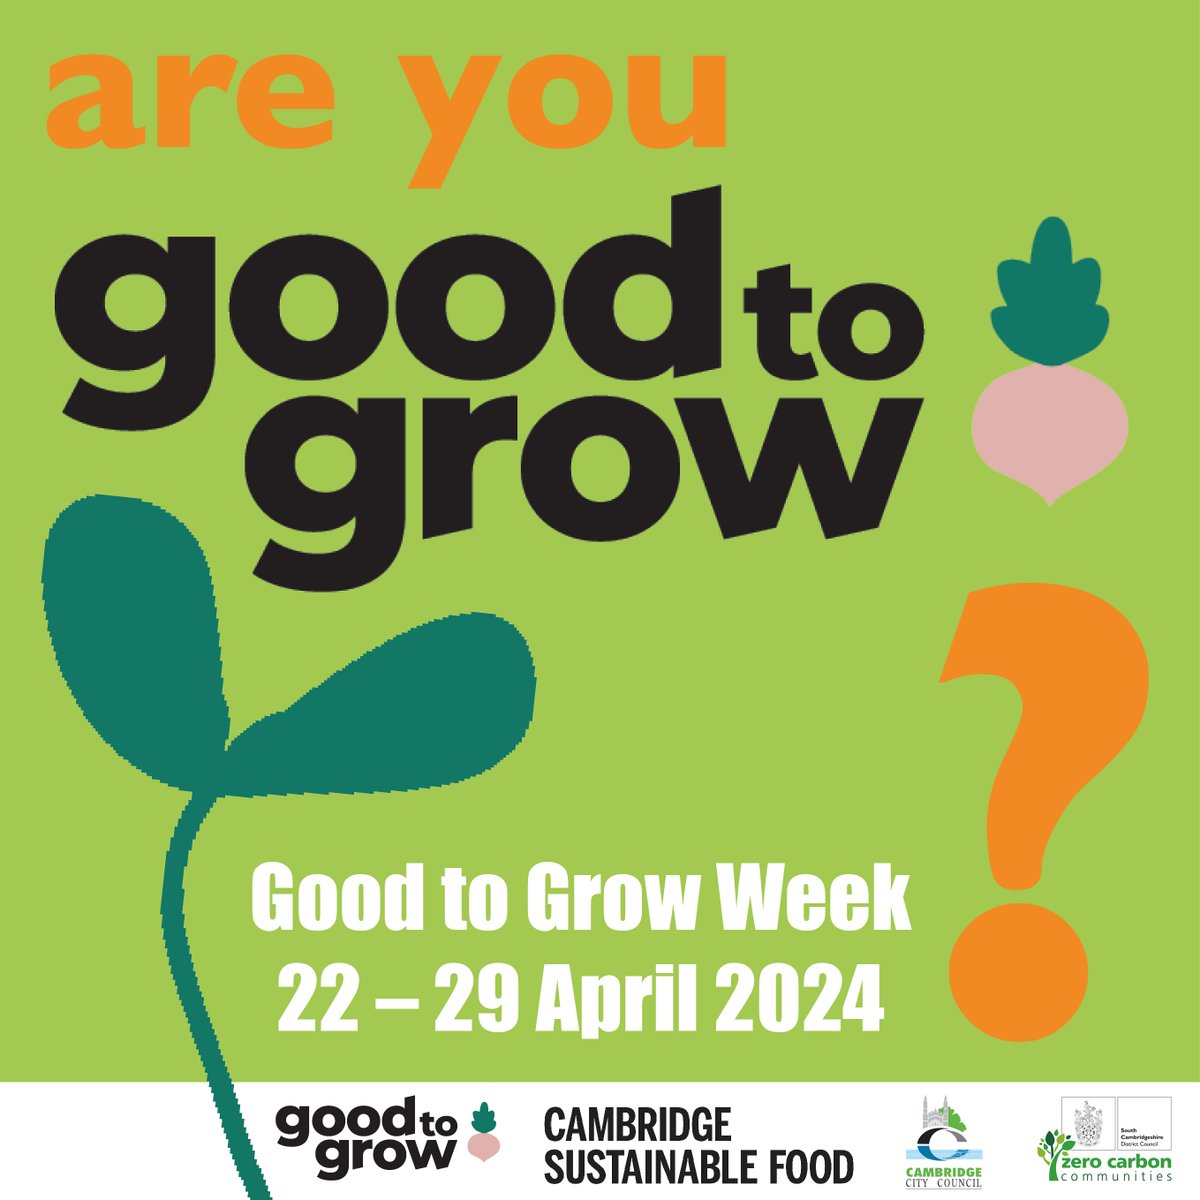 There is loads going on in and around Cambridge this coming week to support #GoodToGrow2024. If you’re interested in volunteering, just click on the garden you'd like to help with on the map and press volunteer now 👉 loom.ly/ptG8asA